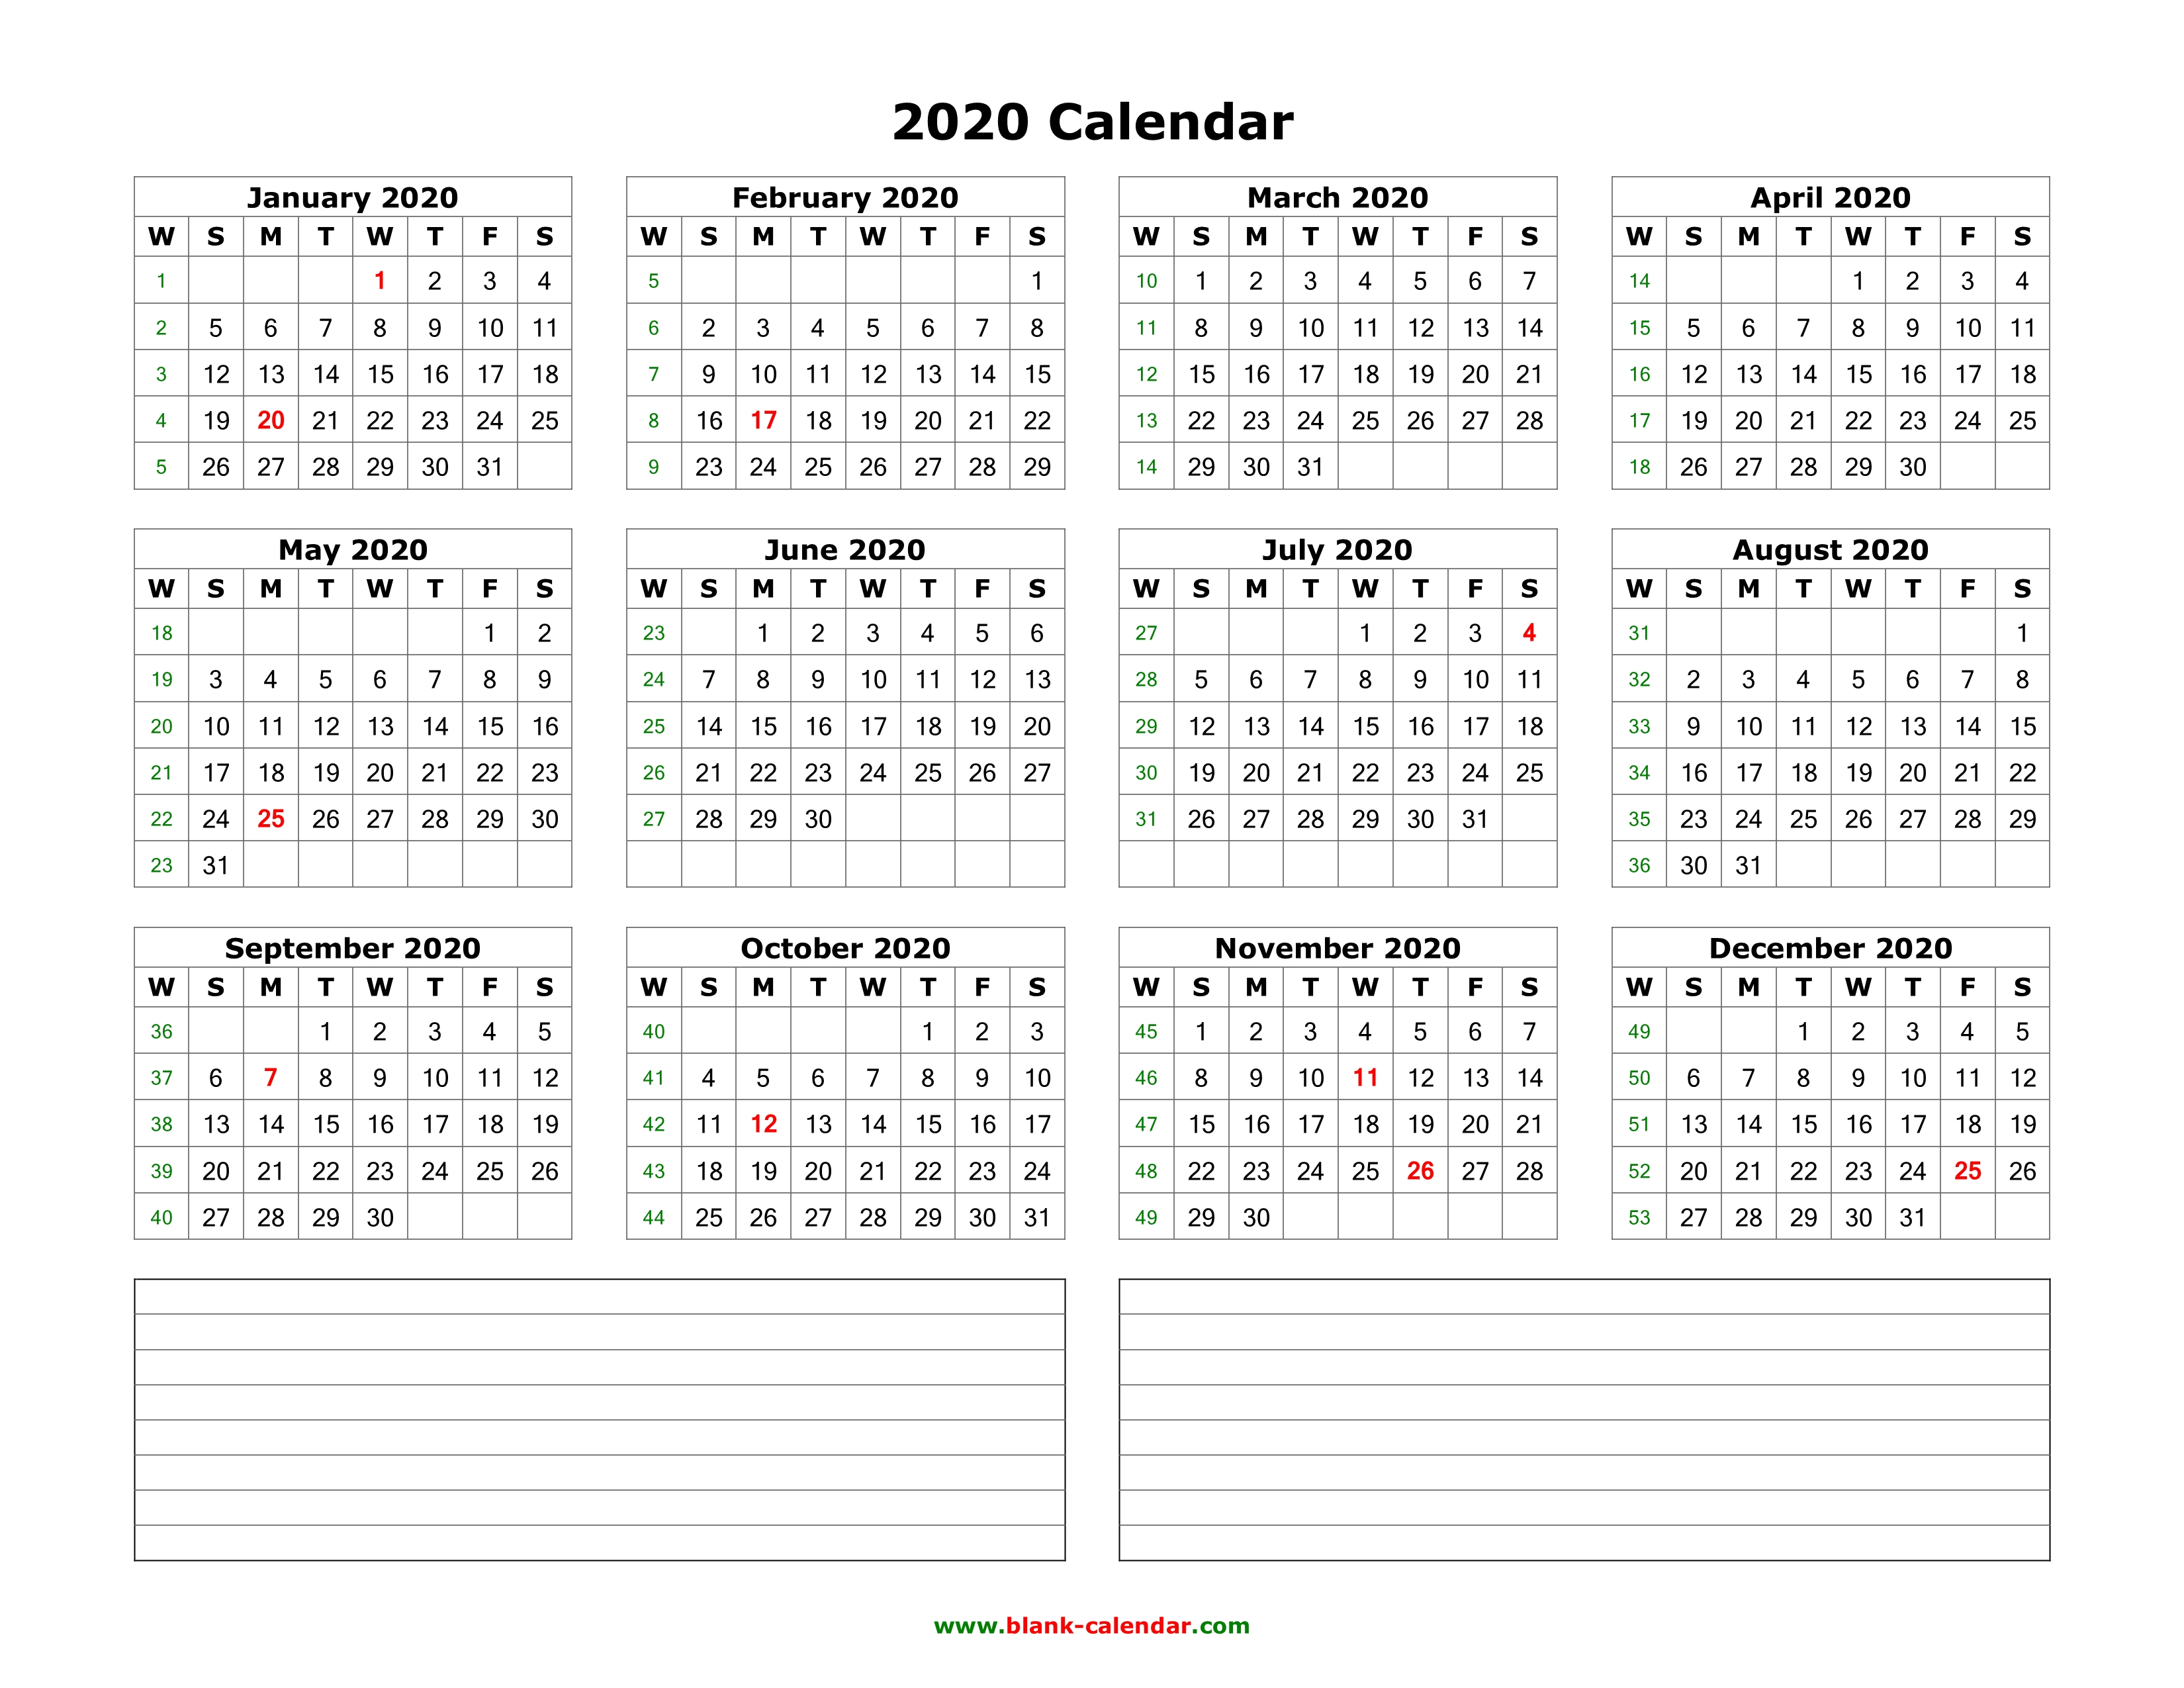 Download Blank Calendar 2020 With Space For Notes (12 Months